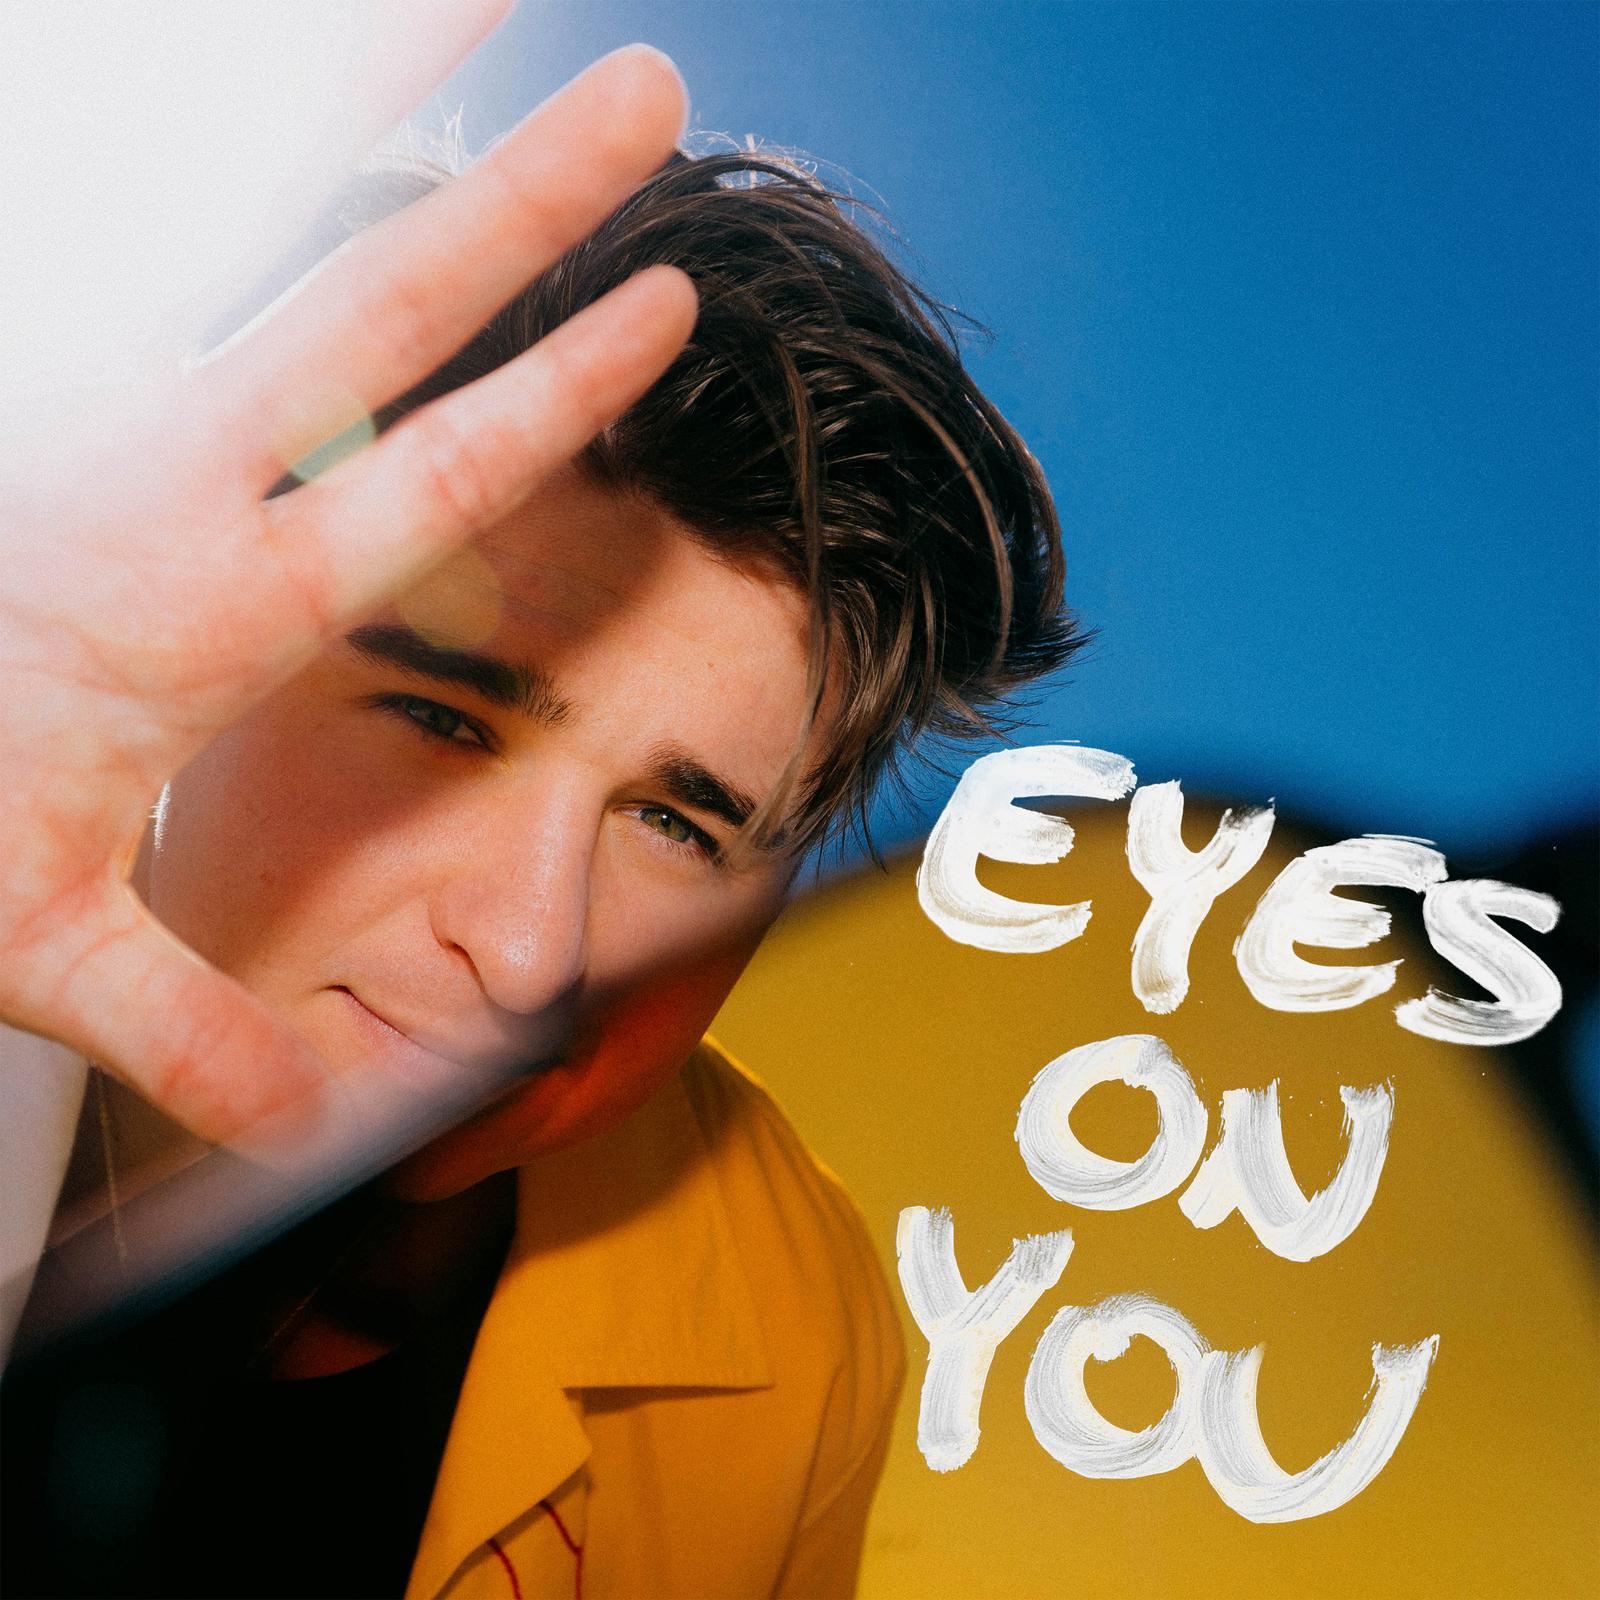 Nicky Your - Eyes On You